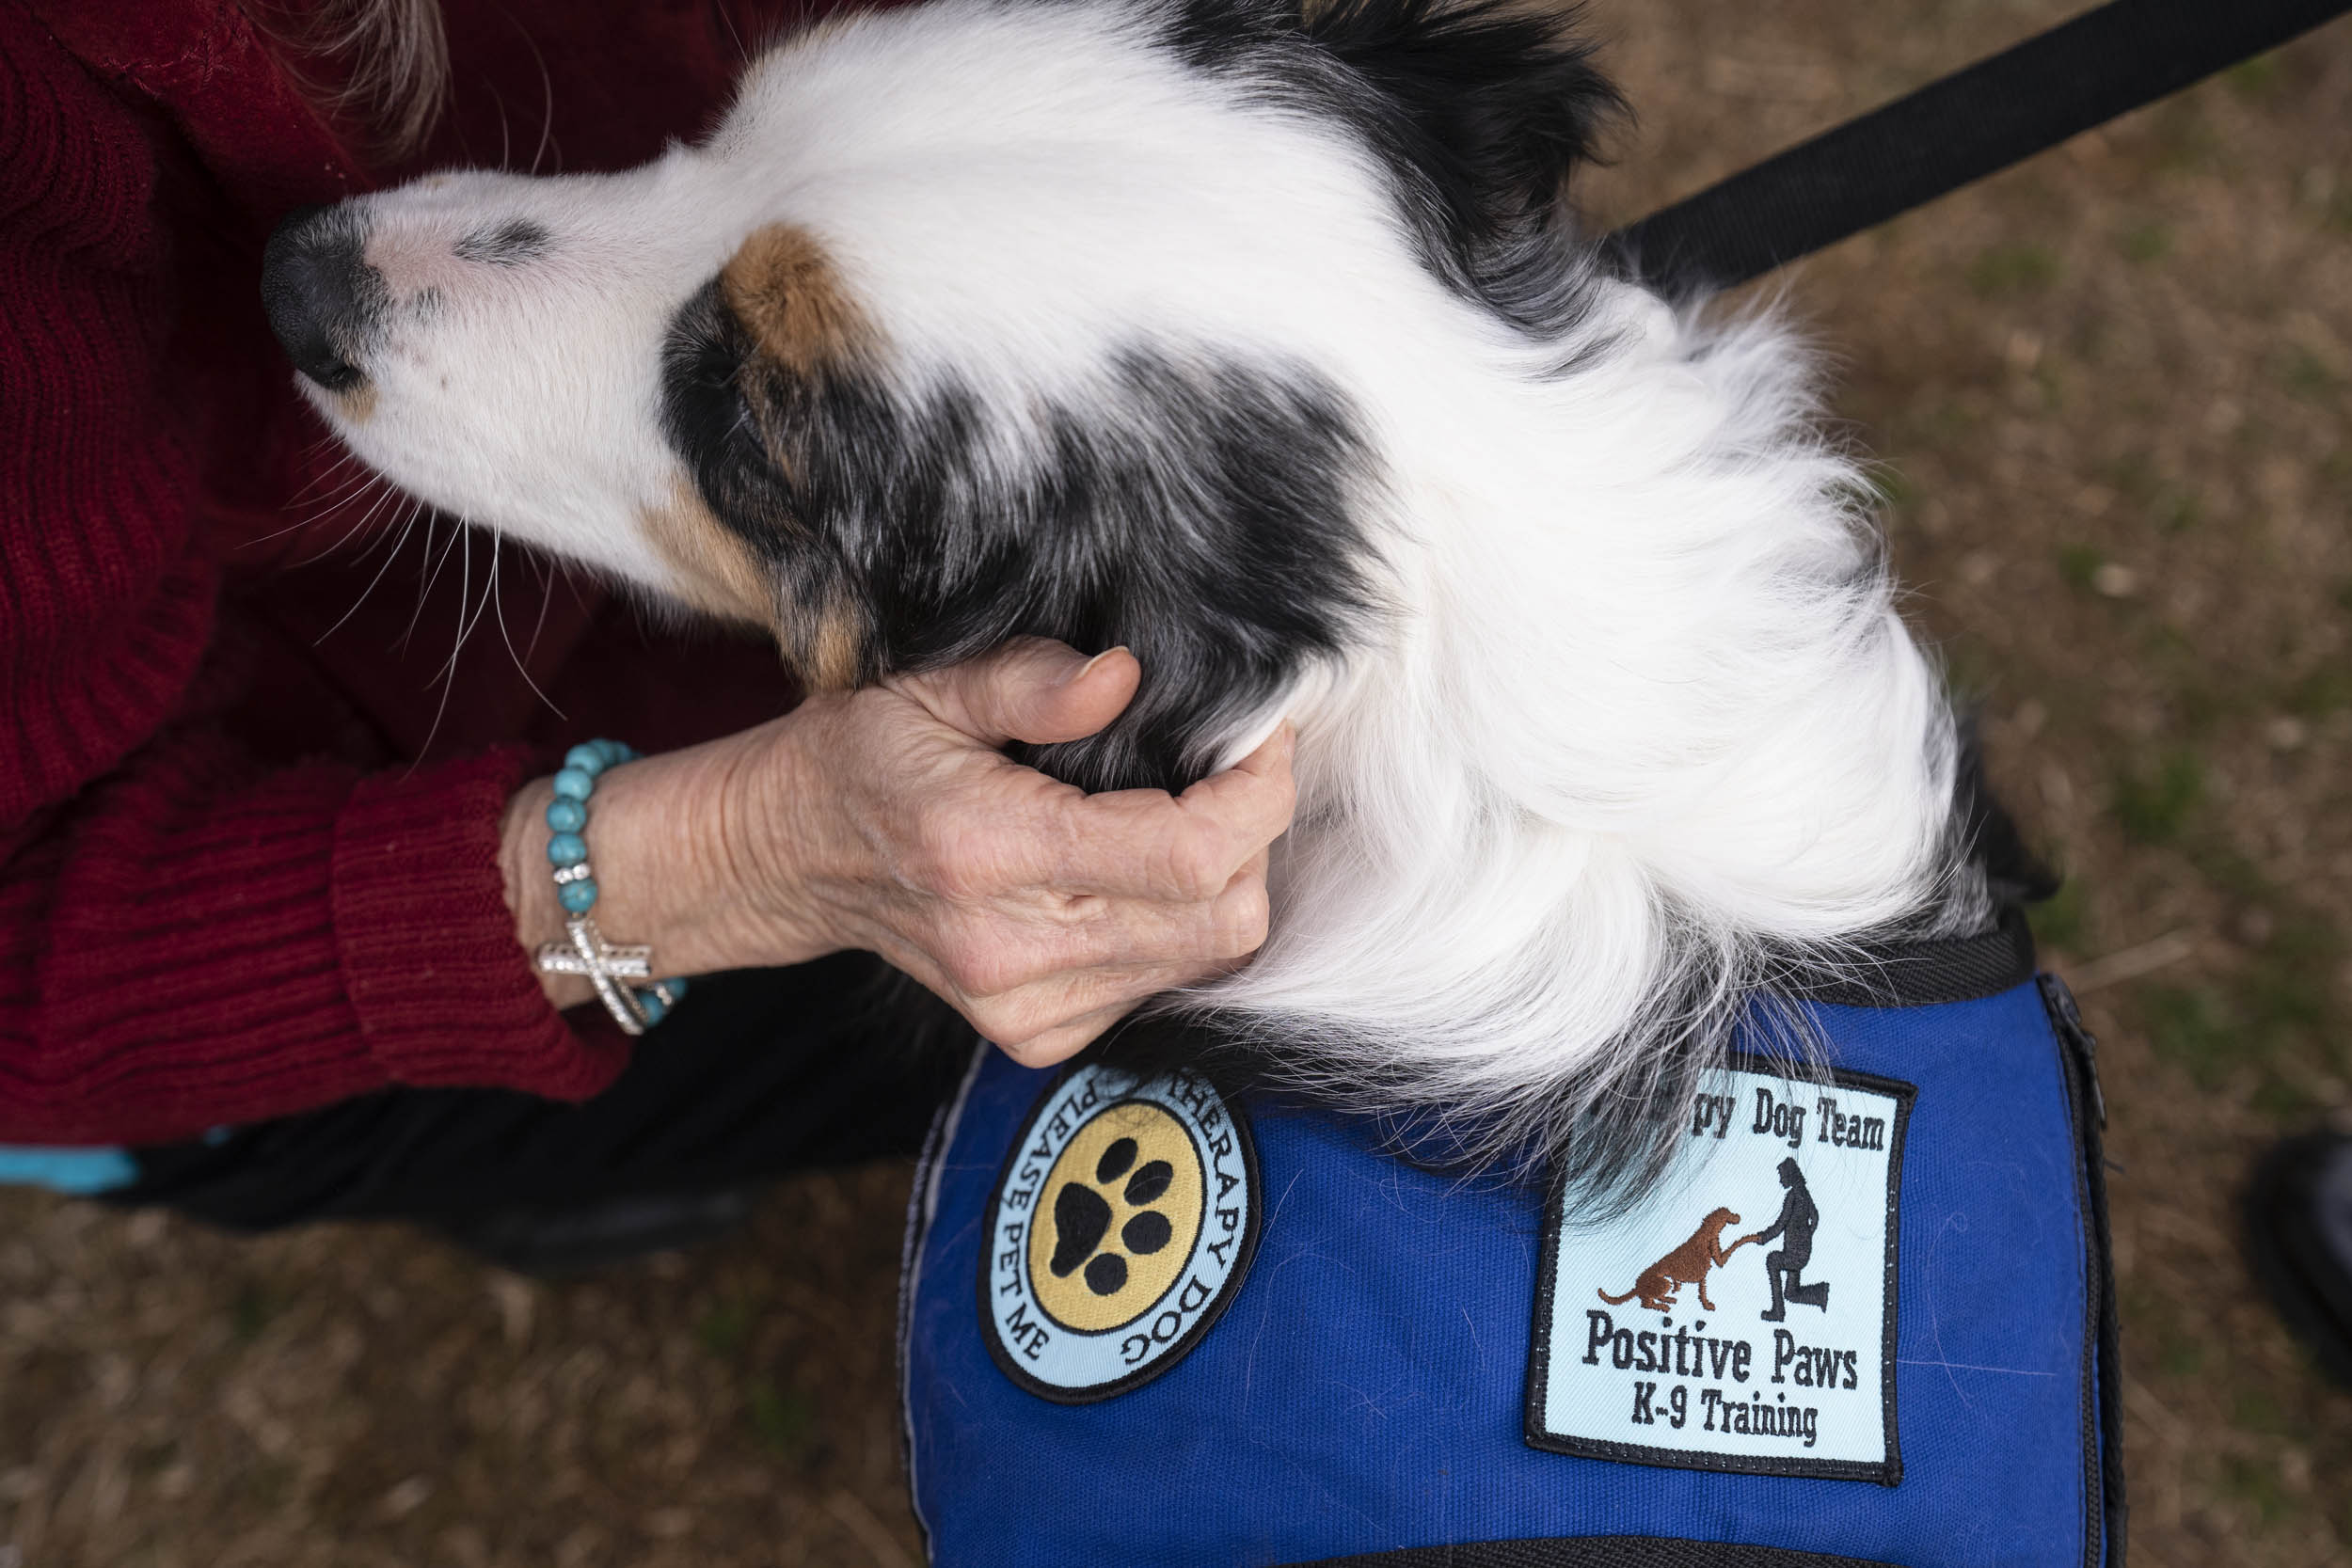 Cooper, a white, black, and brown dog wearing his Therapy dog vest being petted by a person